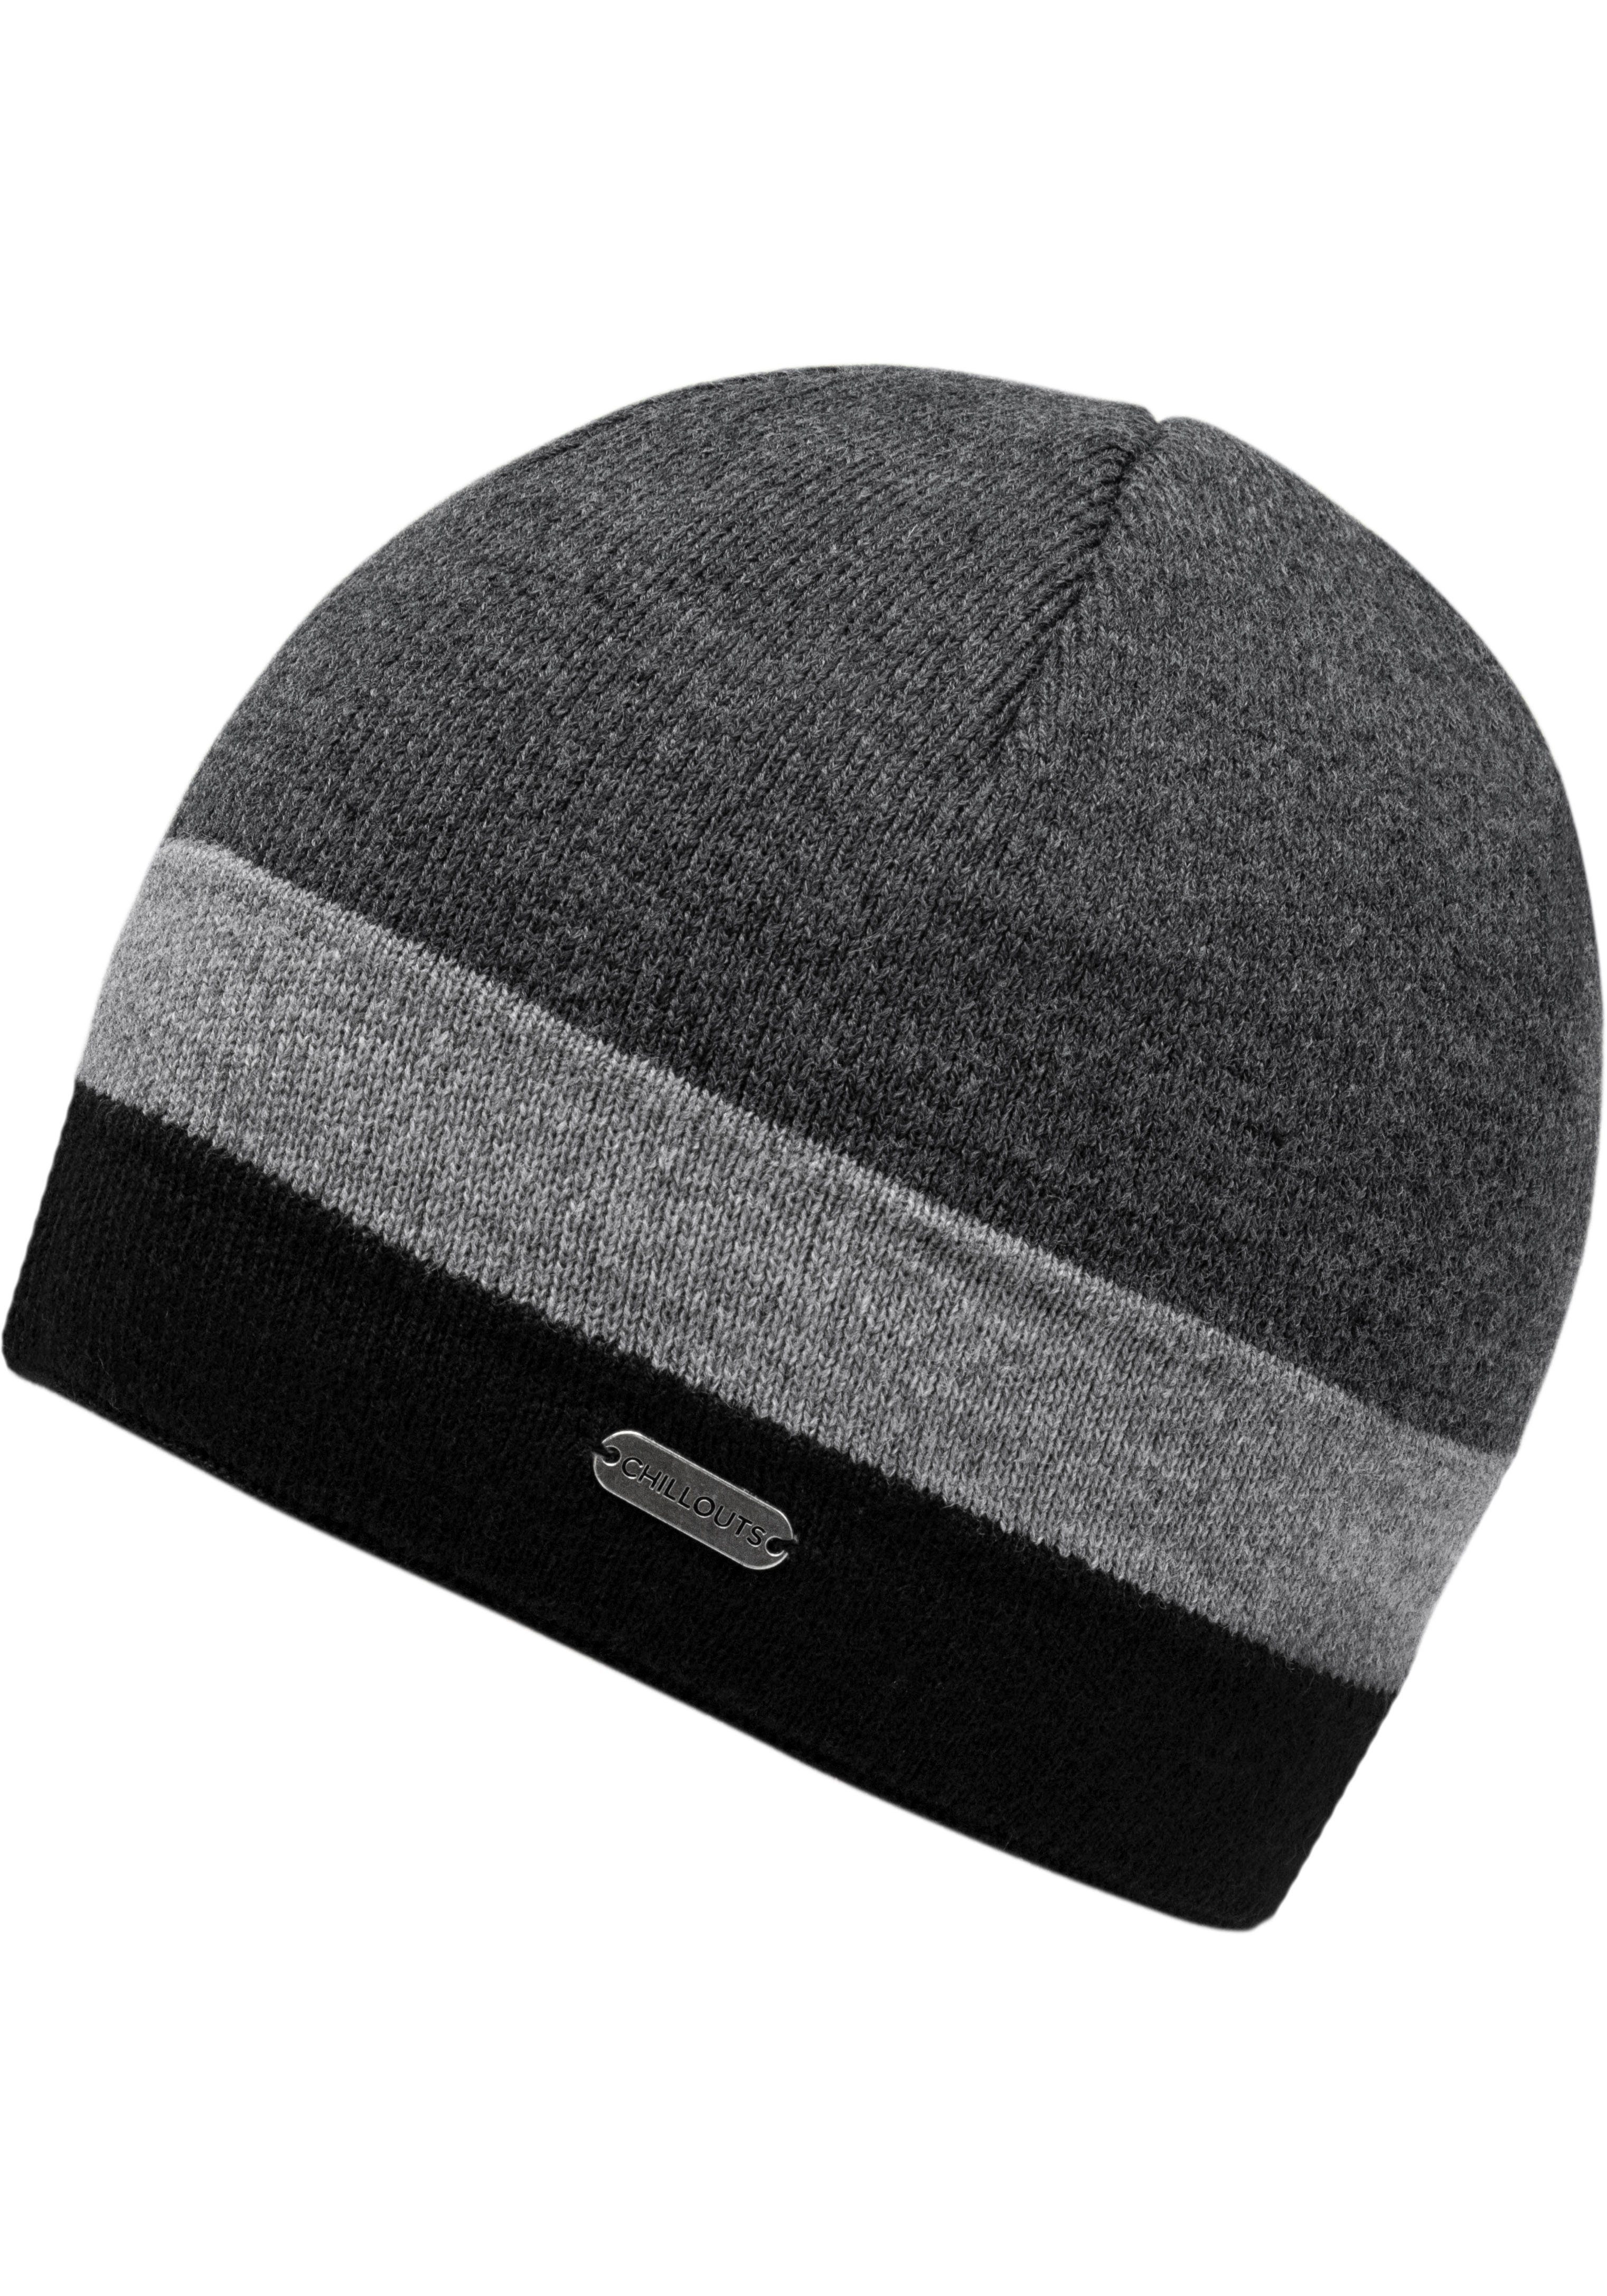 Johnny Johnny Hat chillouts grey Beanie Hat